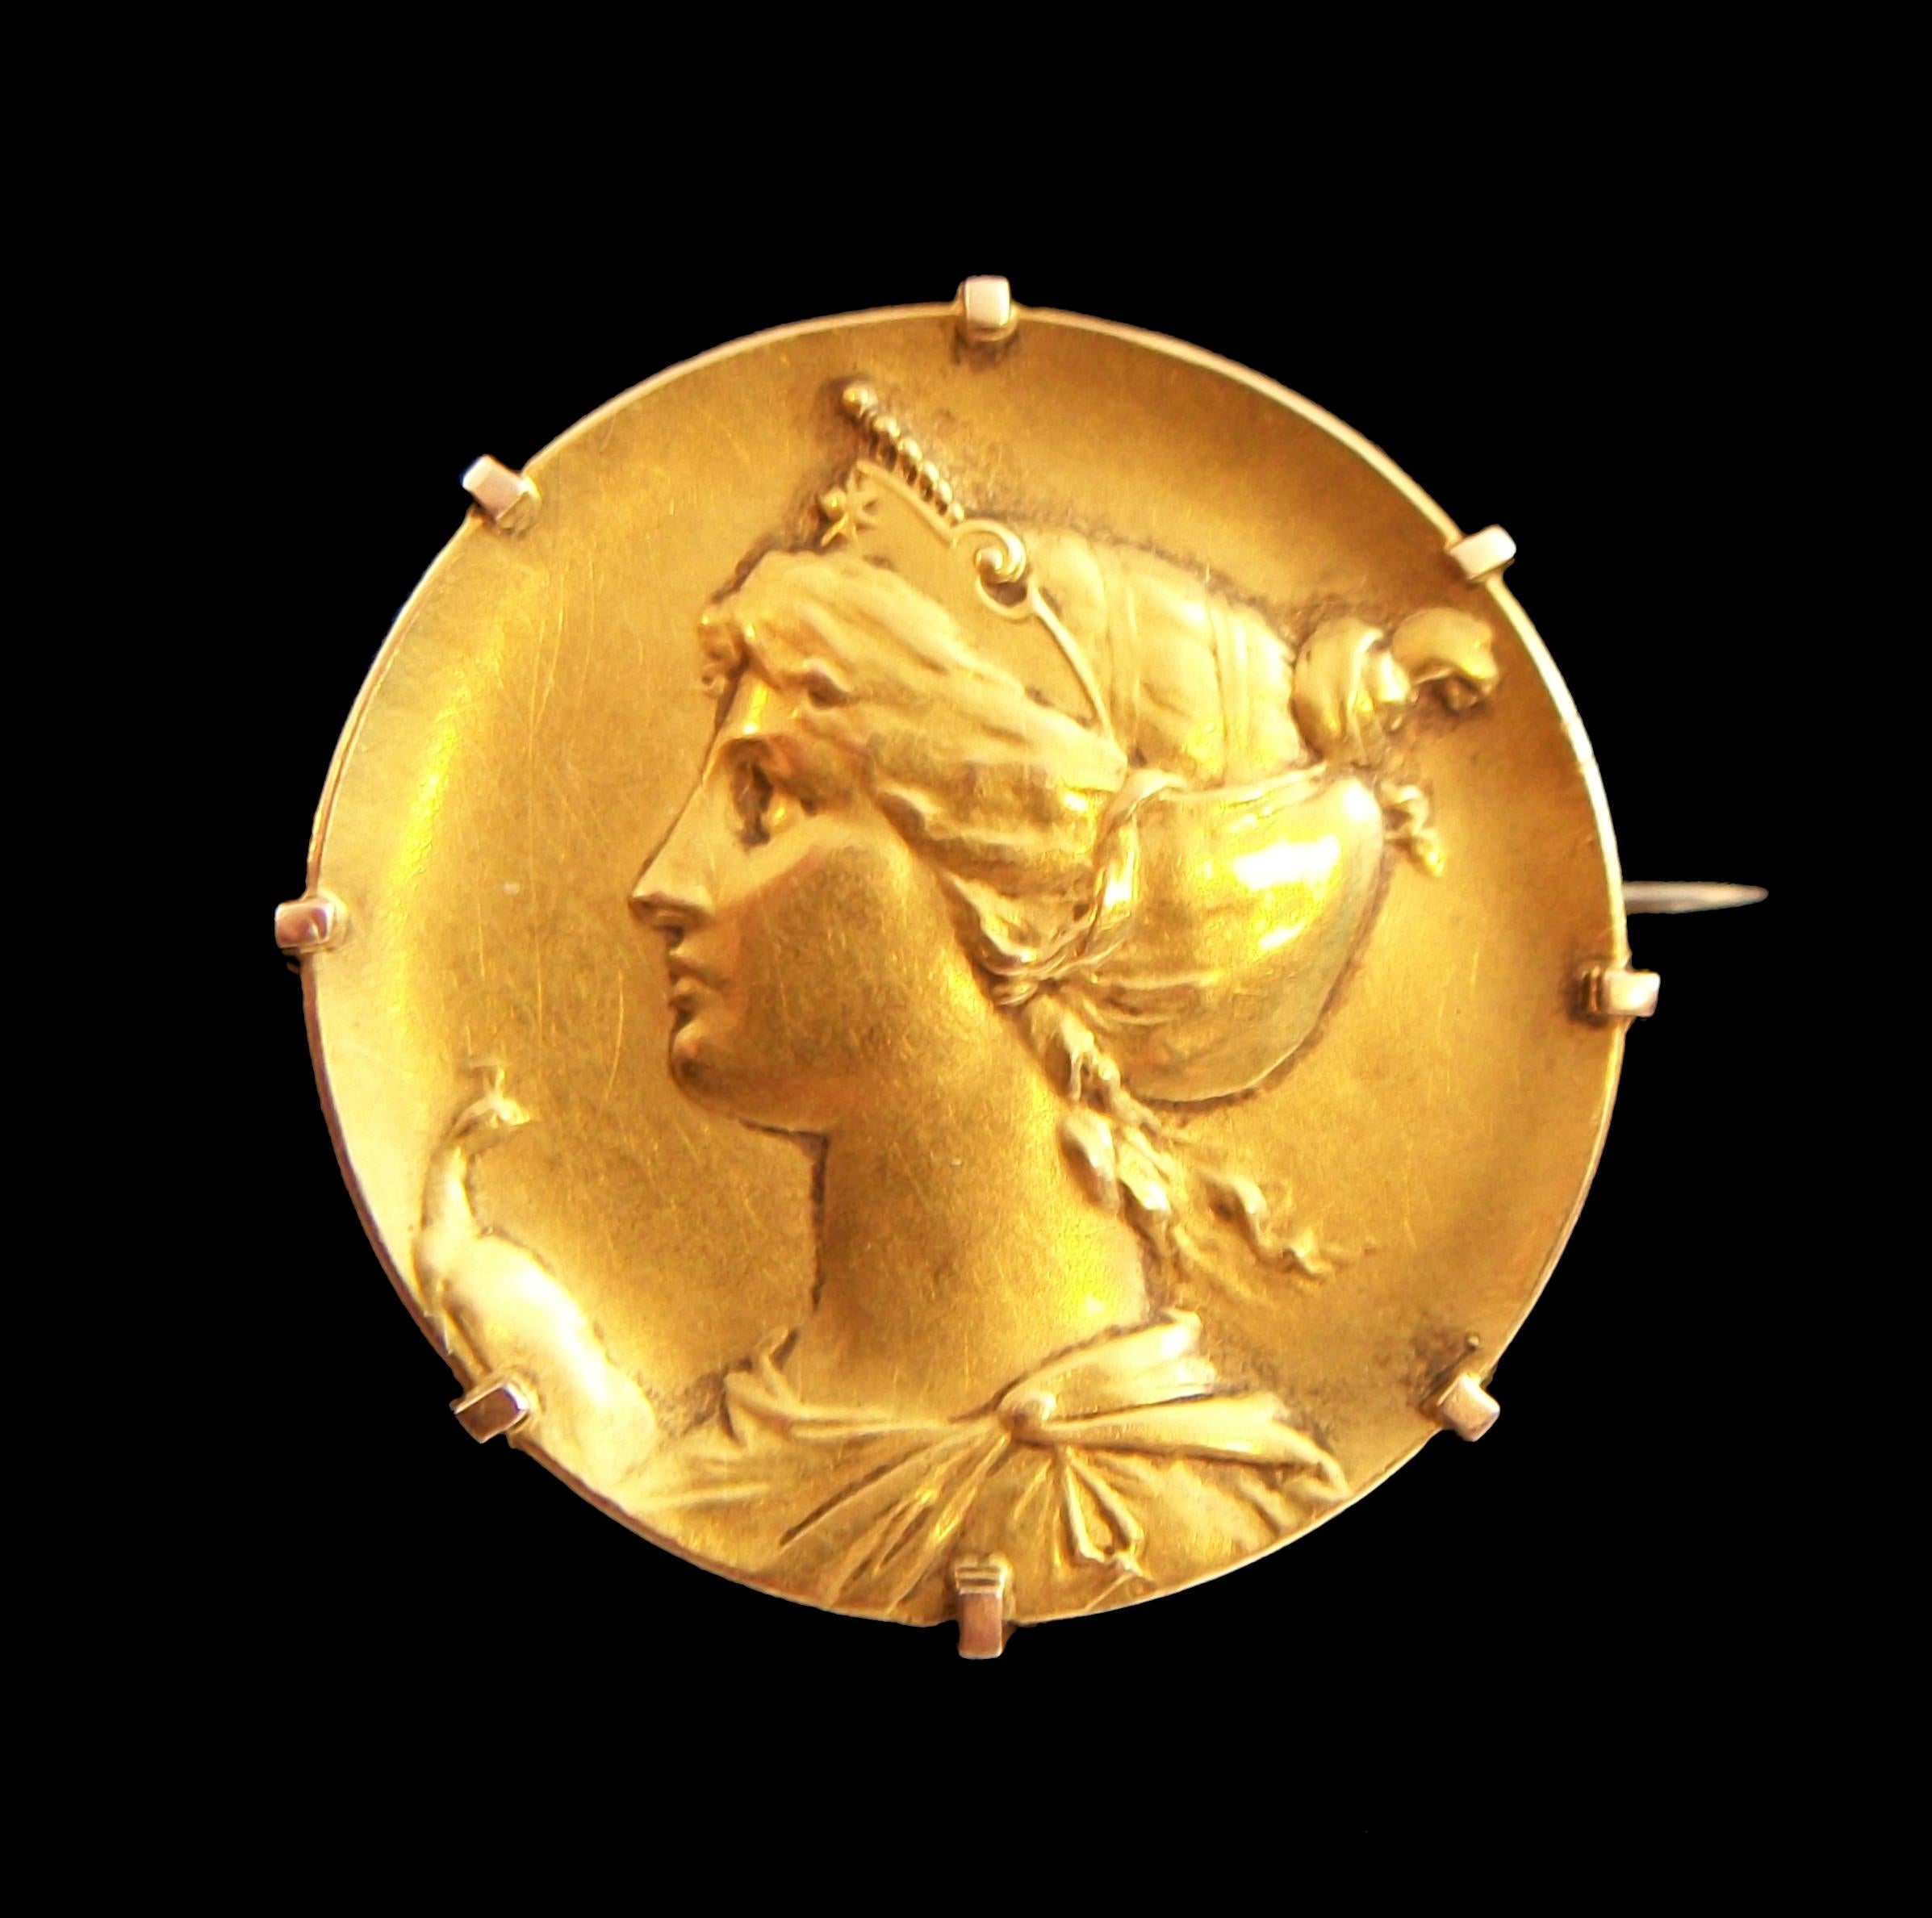 Art Nouveau 18K yellow gold portrait brooch - featuring a classical style portrait bust in relief with a peacock to one side - original steel pin with gold tube hinge and c catch to the back - French gold purity stamp on the c catch - France - circa